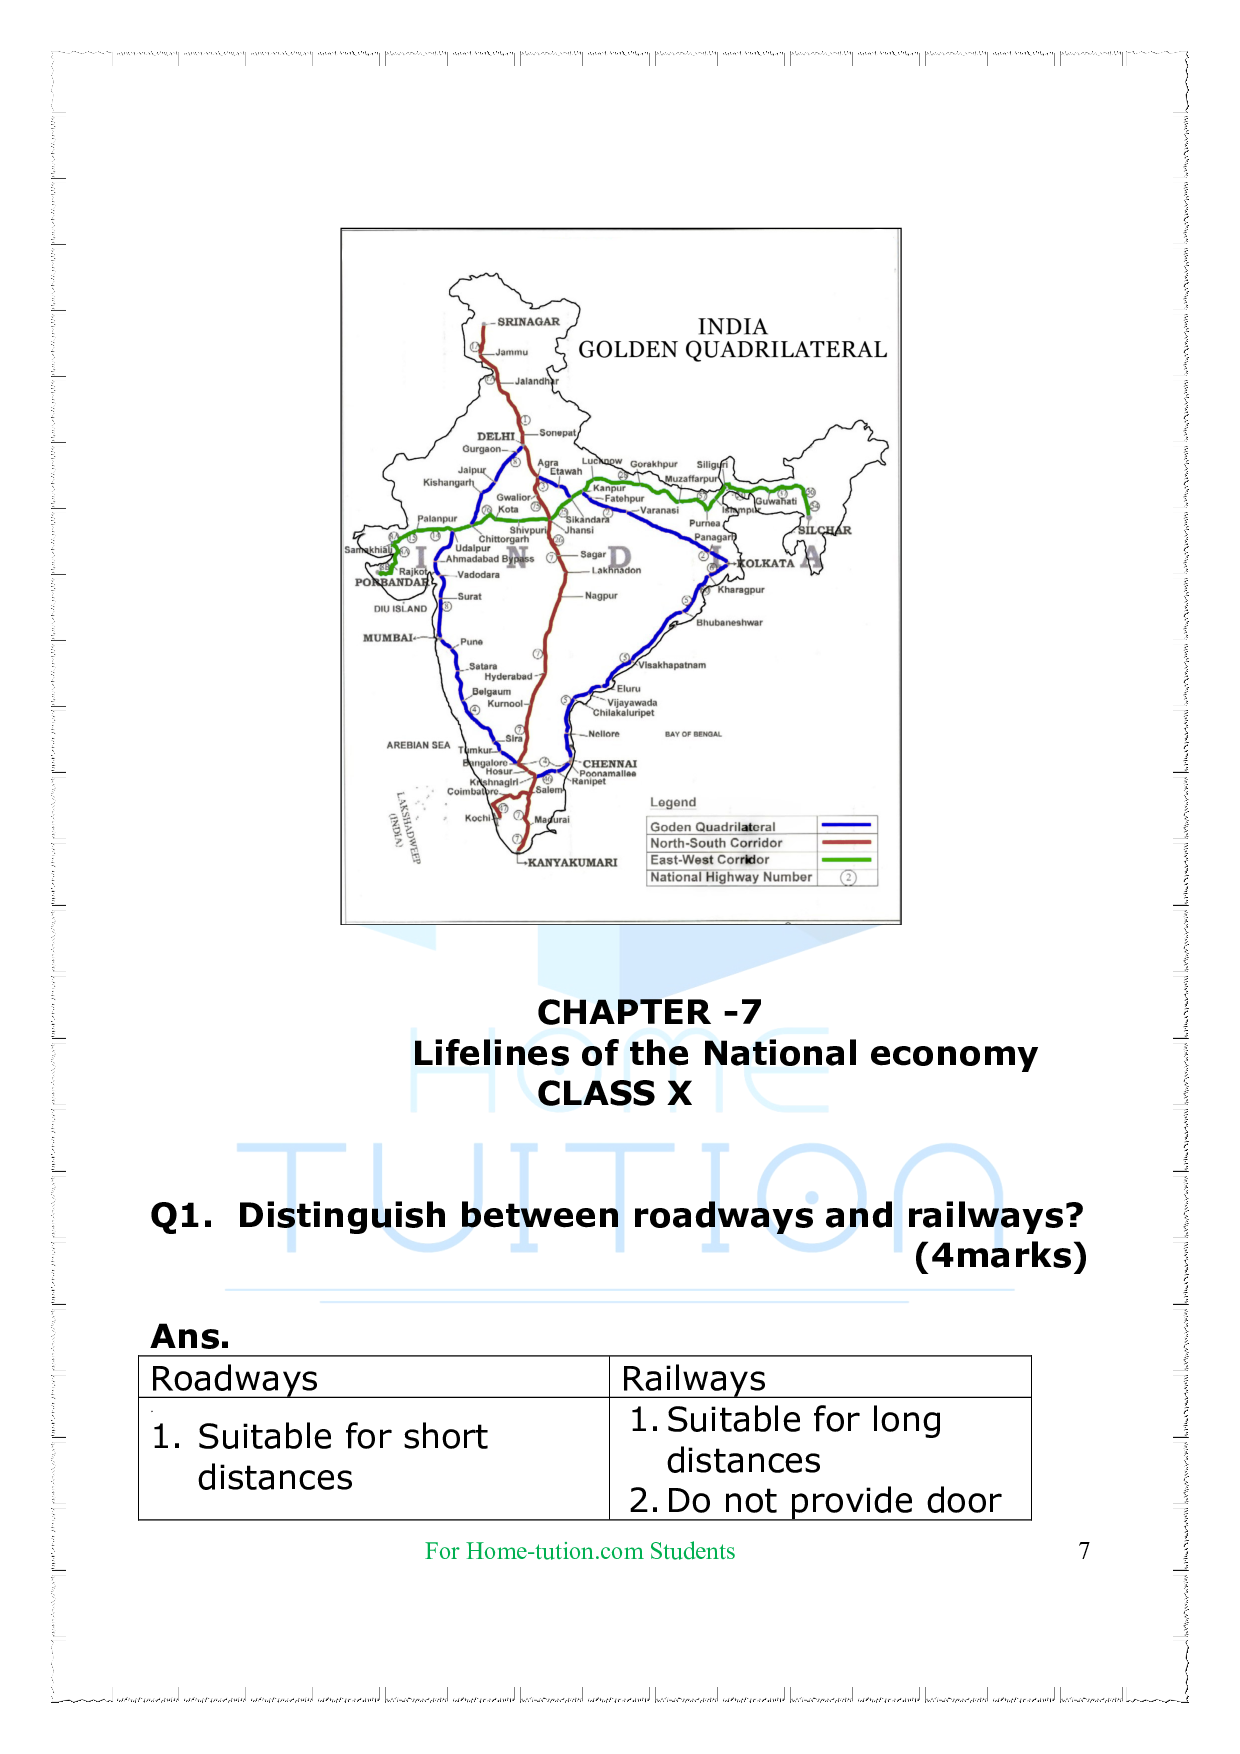 Chapter-7 Lifelines of the National Economy Questions 